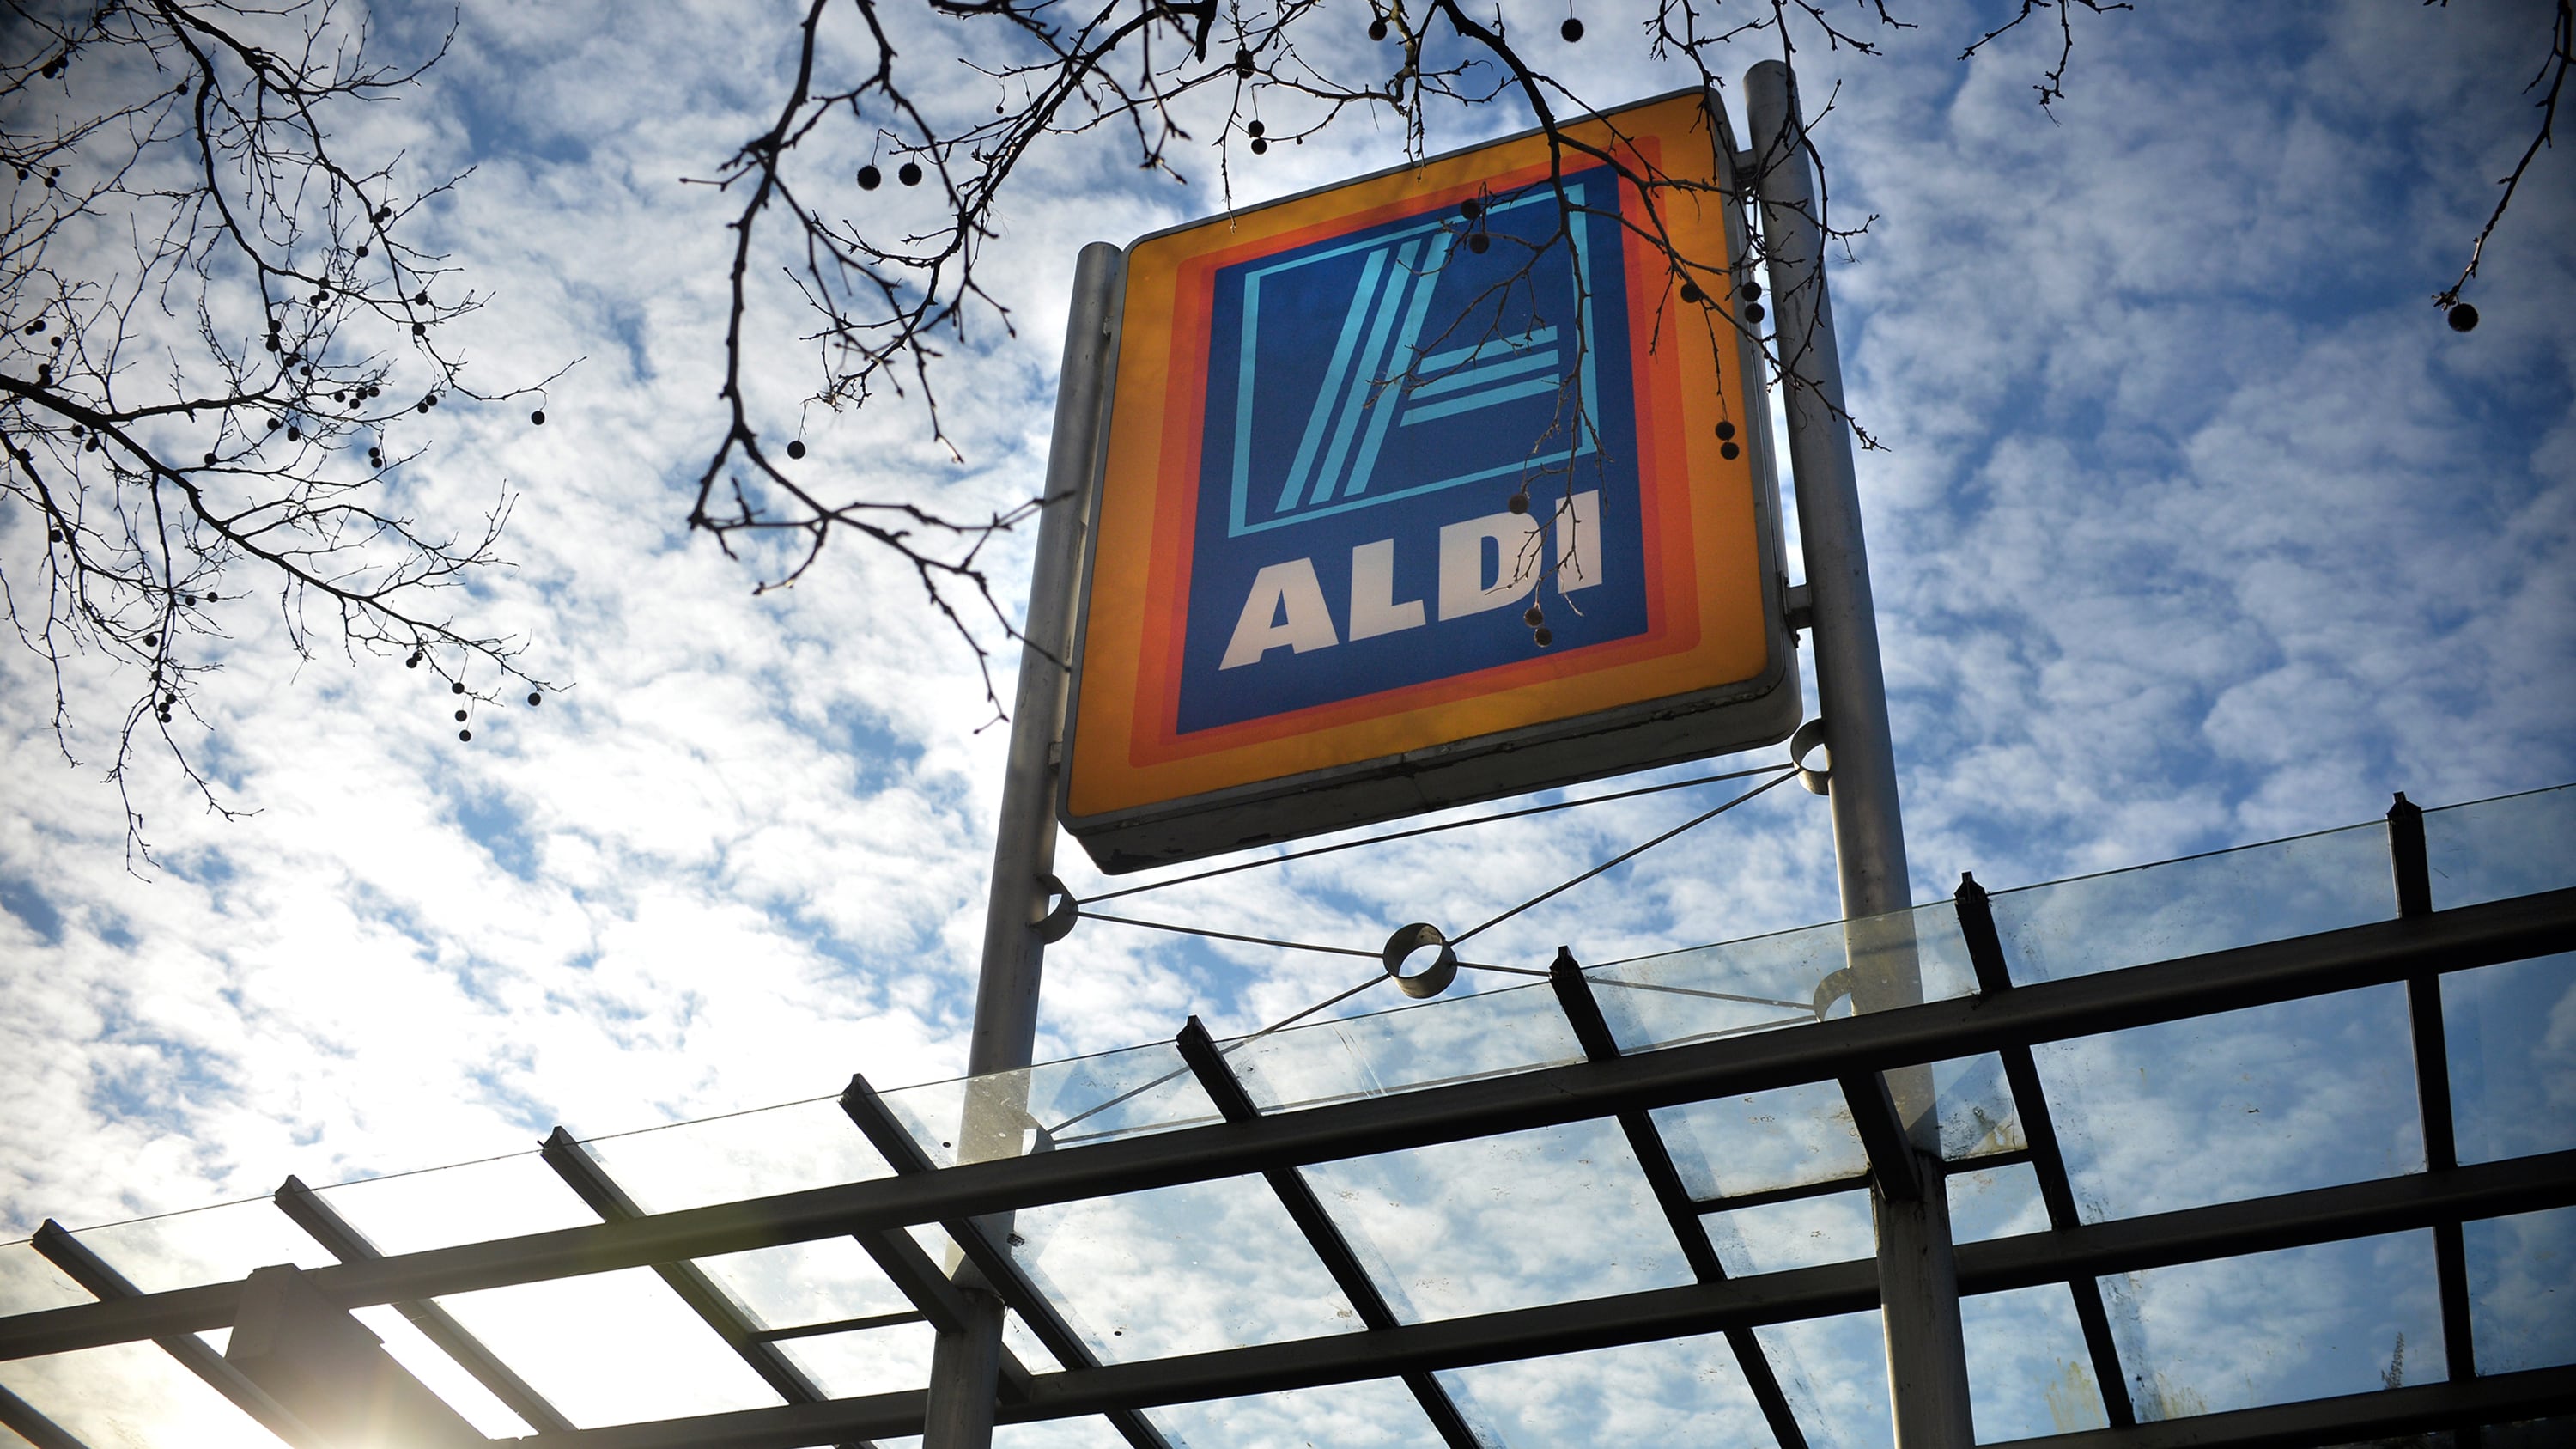 An advert for Aldi claiming the discounter was the ‘home of Britain’s cheapest Christmas dinner’ was misleading, a watchdog has ruled